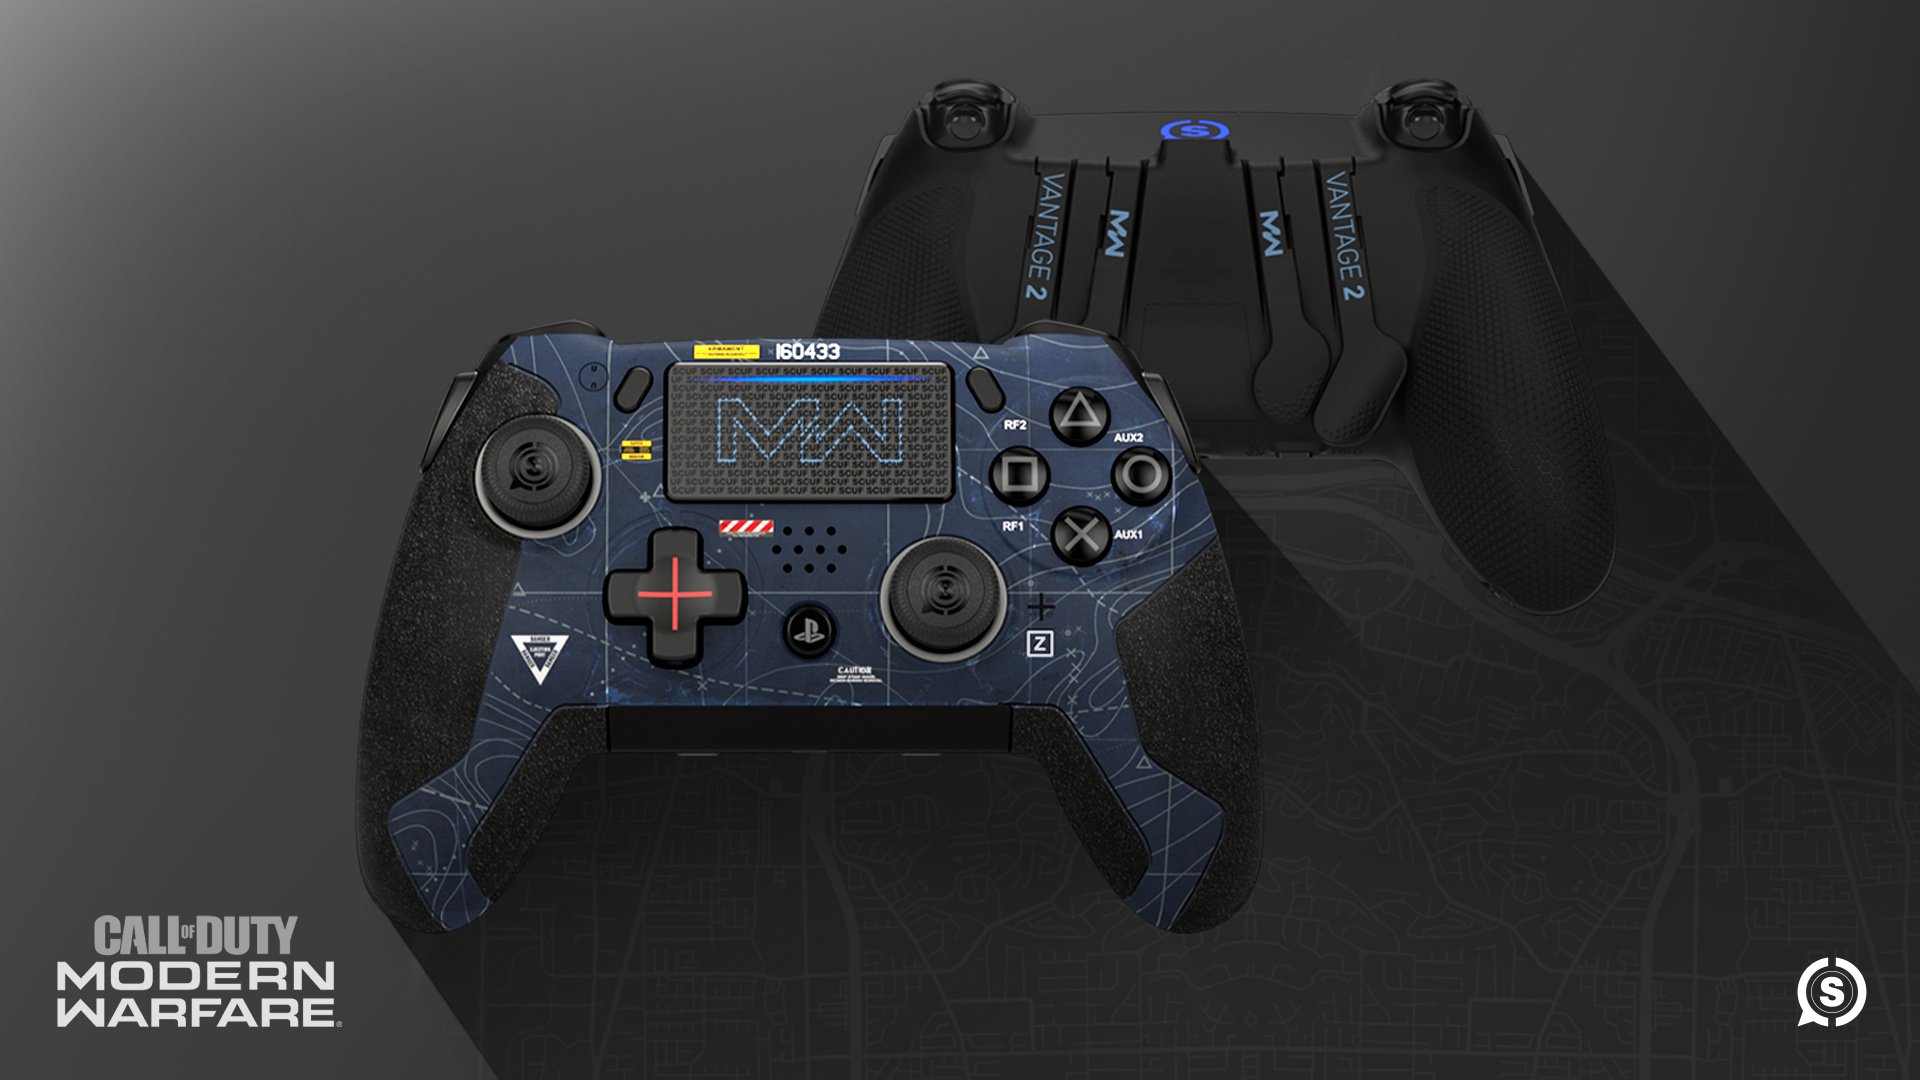 SCUF on Twitter: "Watch six. 🤐 Introducing the SCUF Vantage 2 Call of Duty®: Modern Warfare® Limited Edition Controller for 4 &amp; PC. Pre-order now: https://t.co/Otc8SryZmh" / X